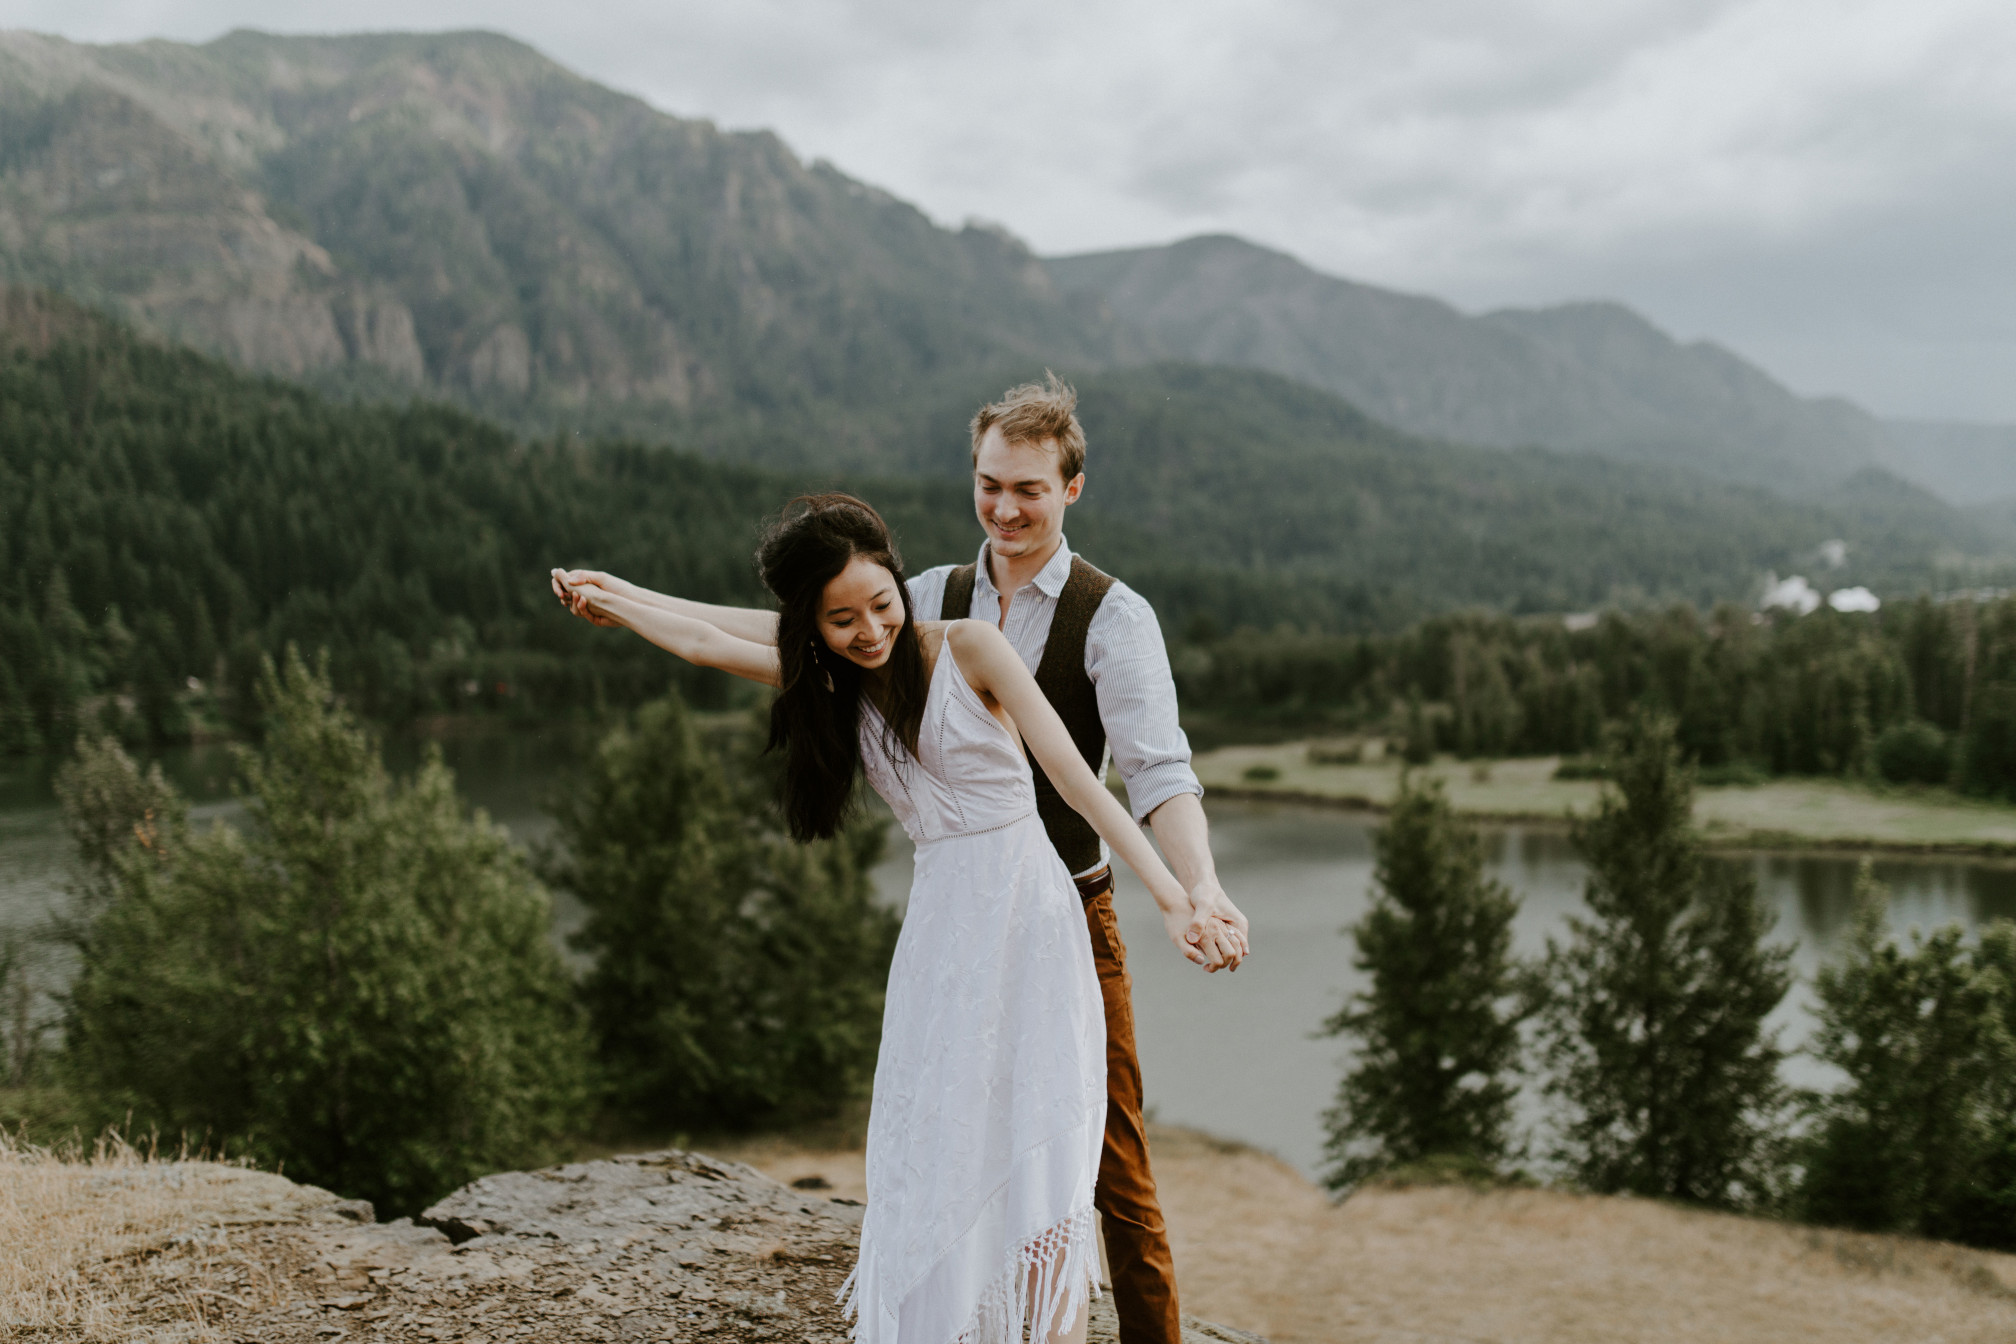 Jacob and Kimberlie stand near the cliff of Cascade Locks. Elopement wedding photography at Cascade Locks by Sienna Plus Josh.